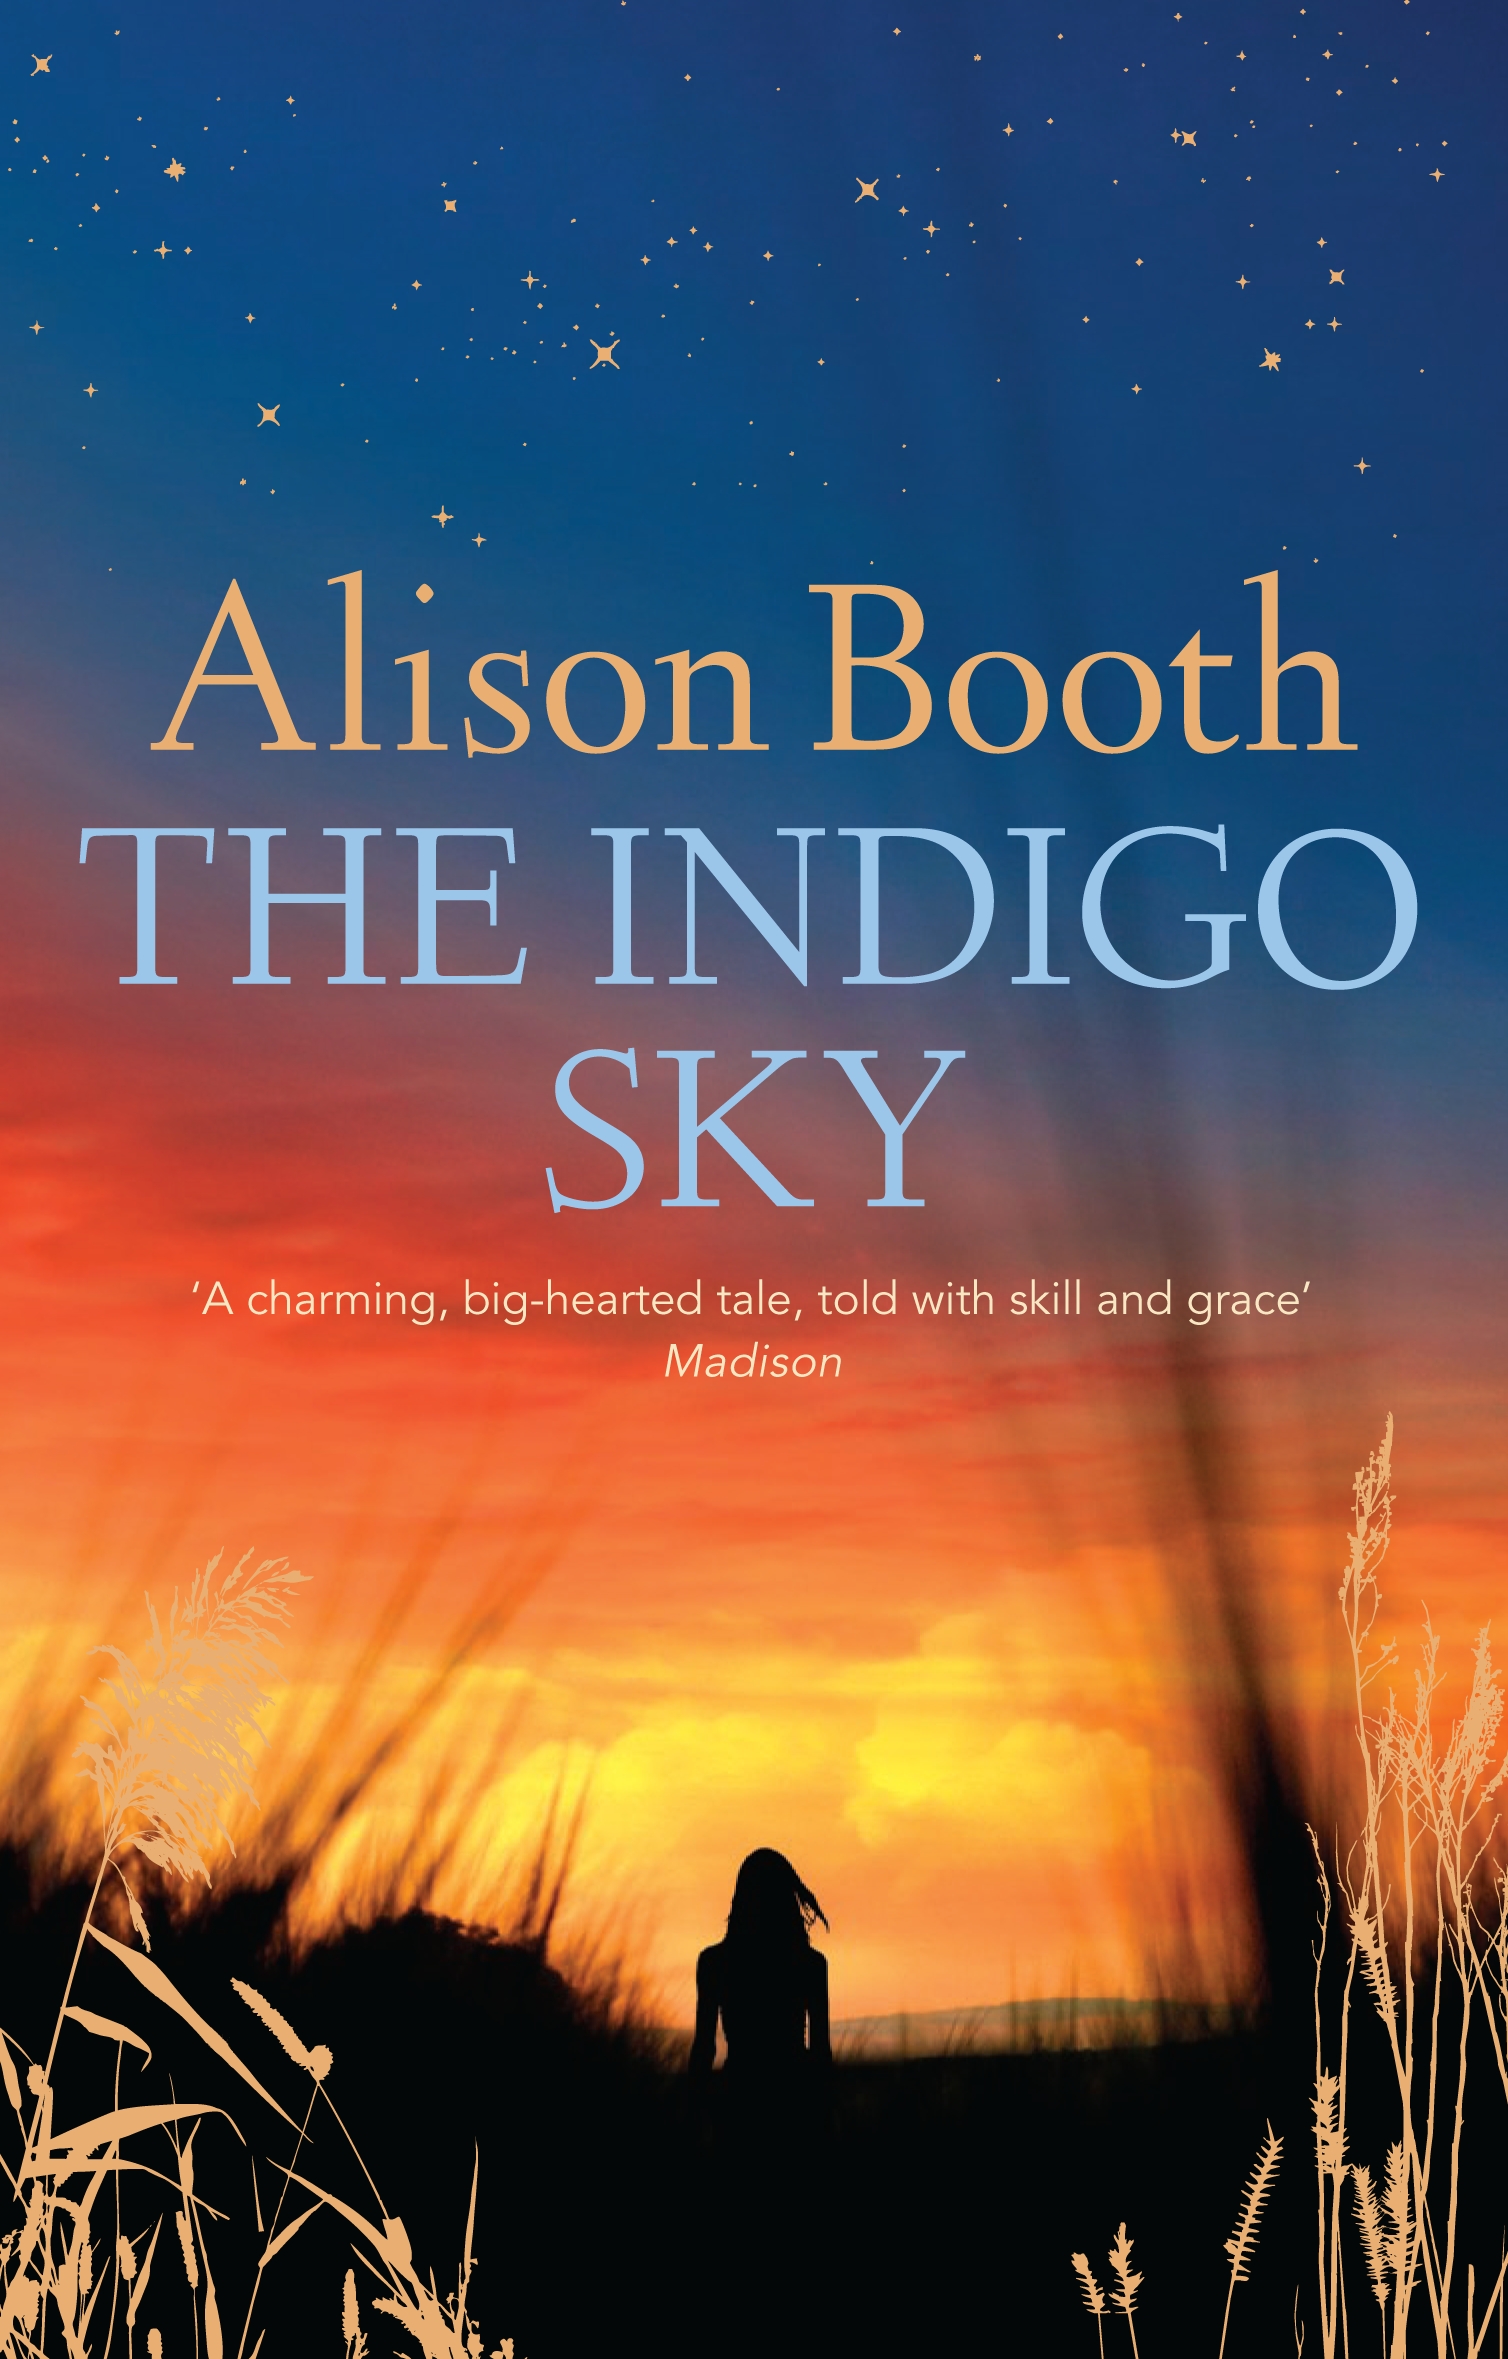 The Indigo Sky by Alison Booth - Penguin Books New Zealand